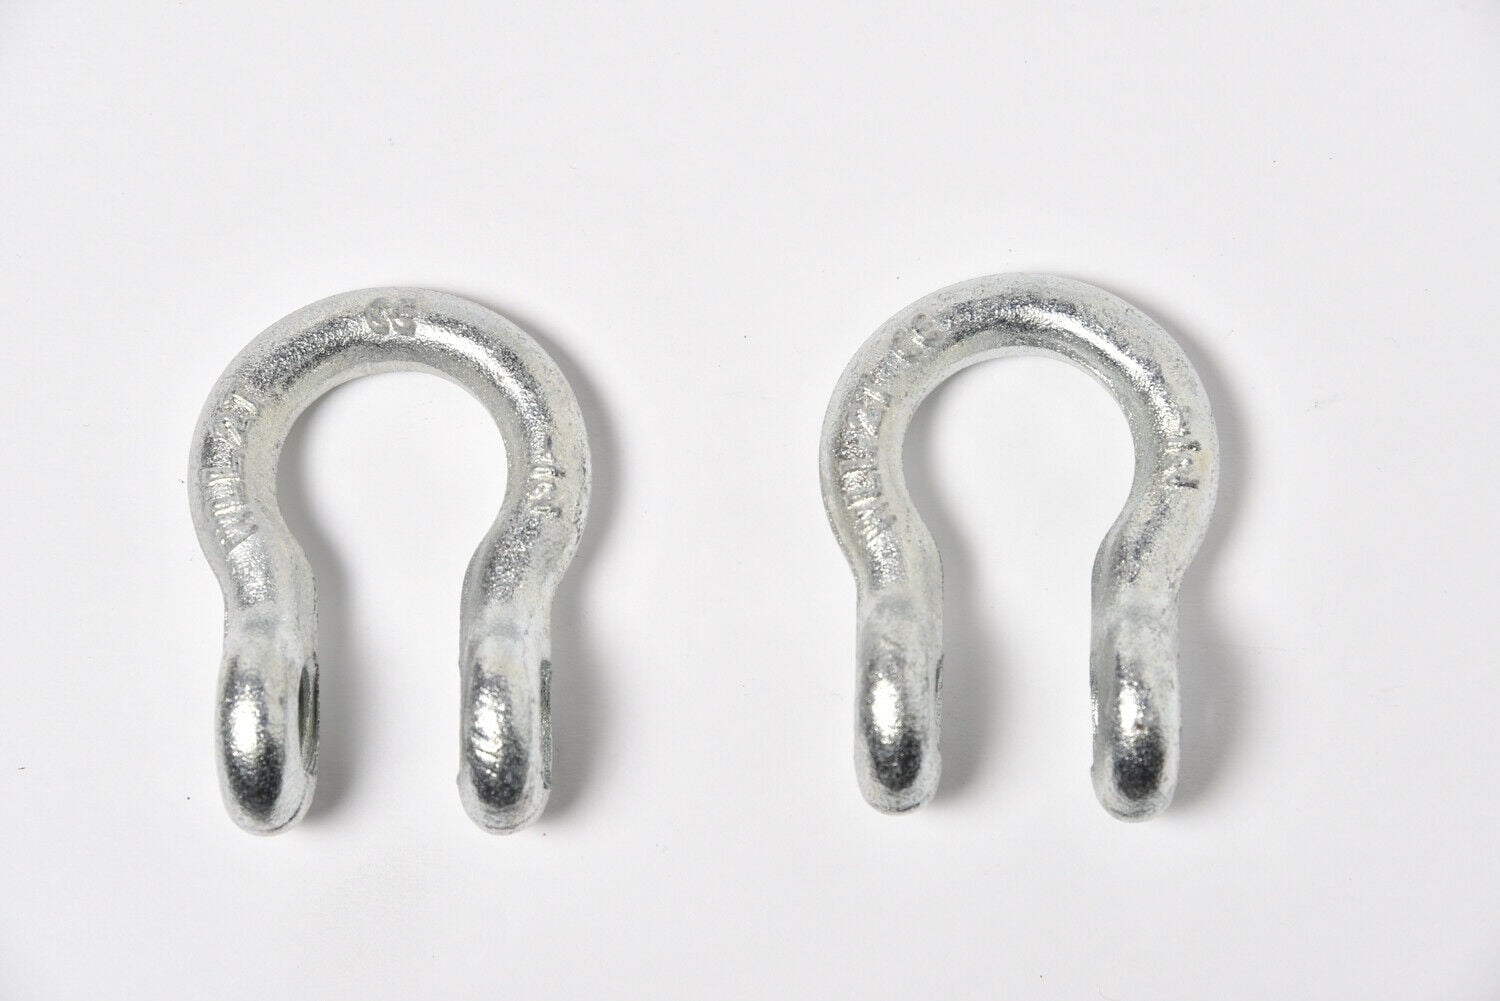 2x 1/2" Bow Shackle D-Ring w Clevis Screw Pin Anchor 2 TON 4400 lbs capacity 